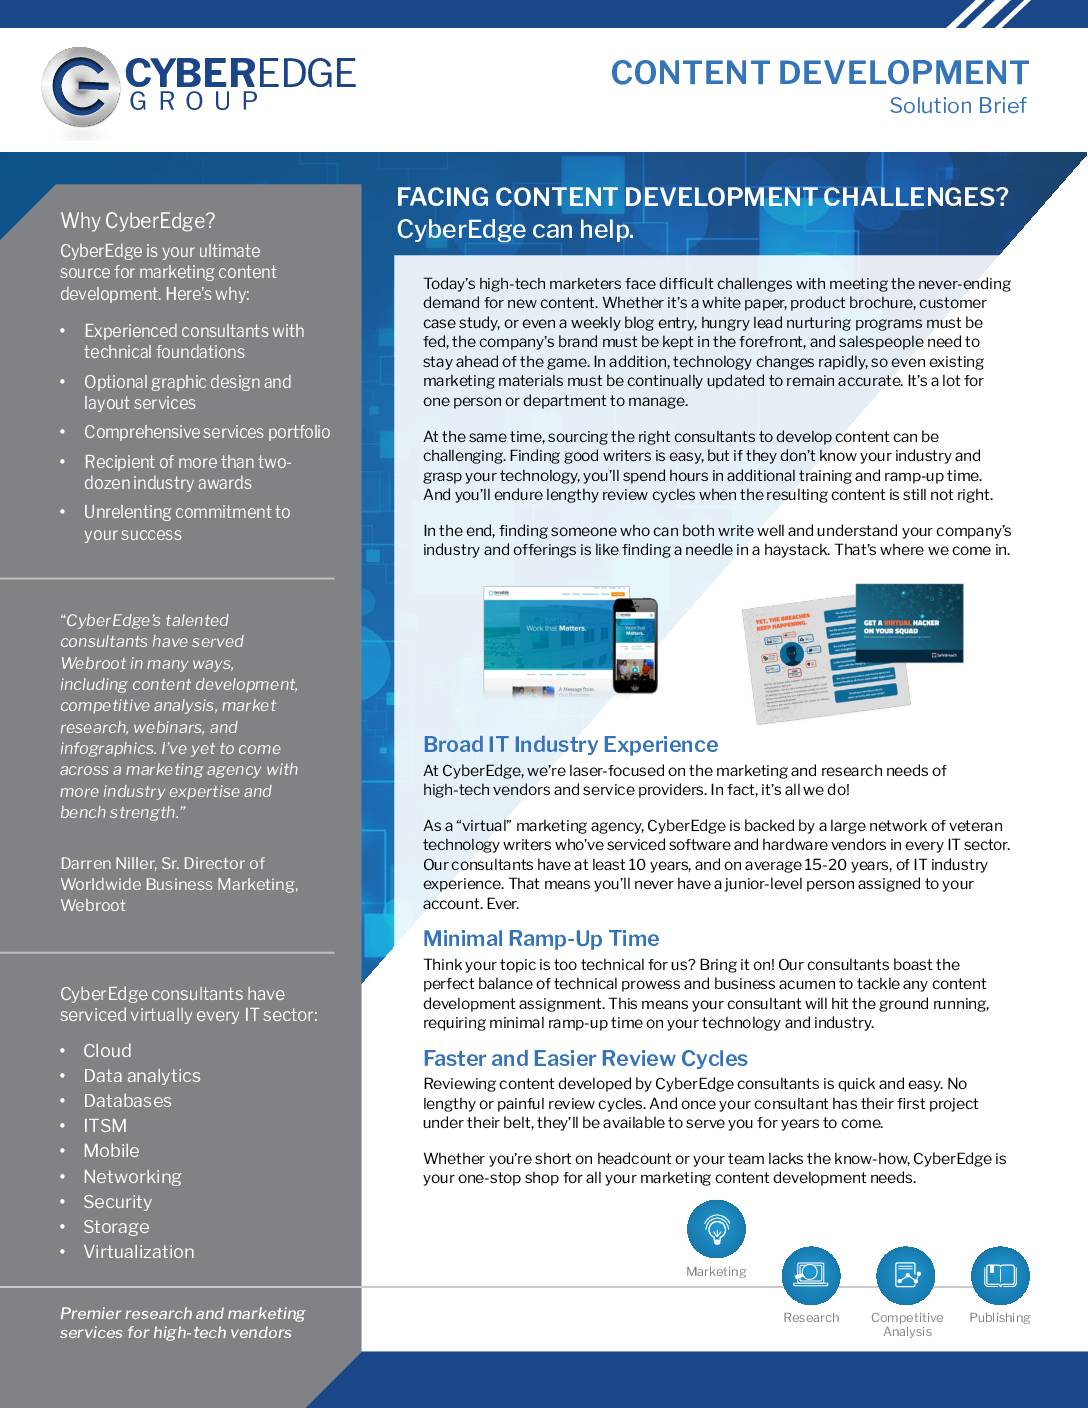 Featured image for Content Development Solution Brief